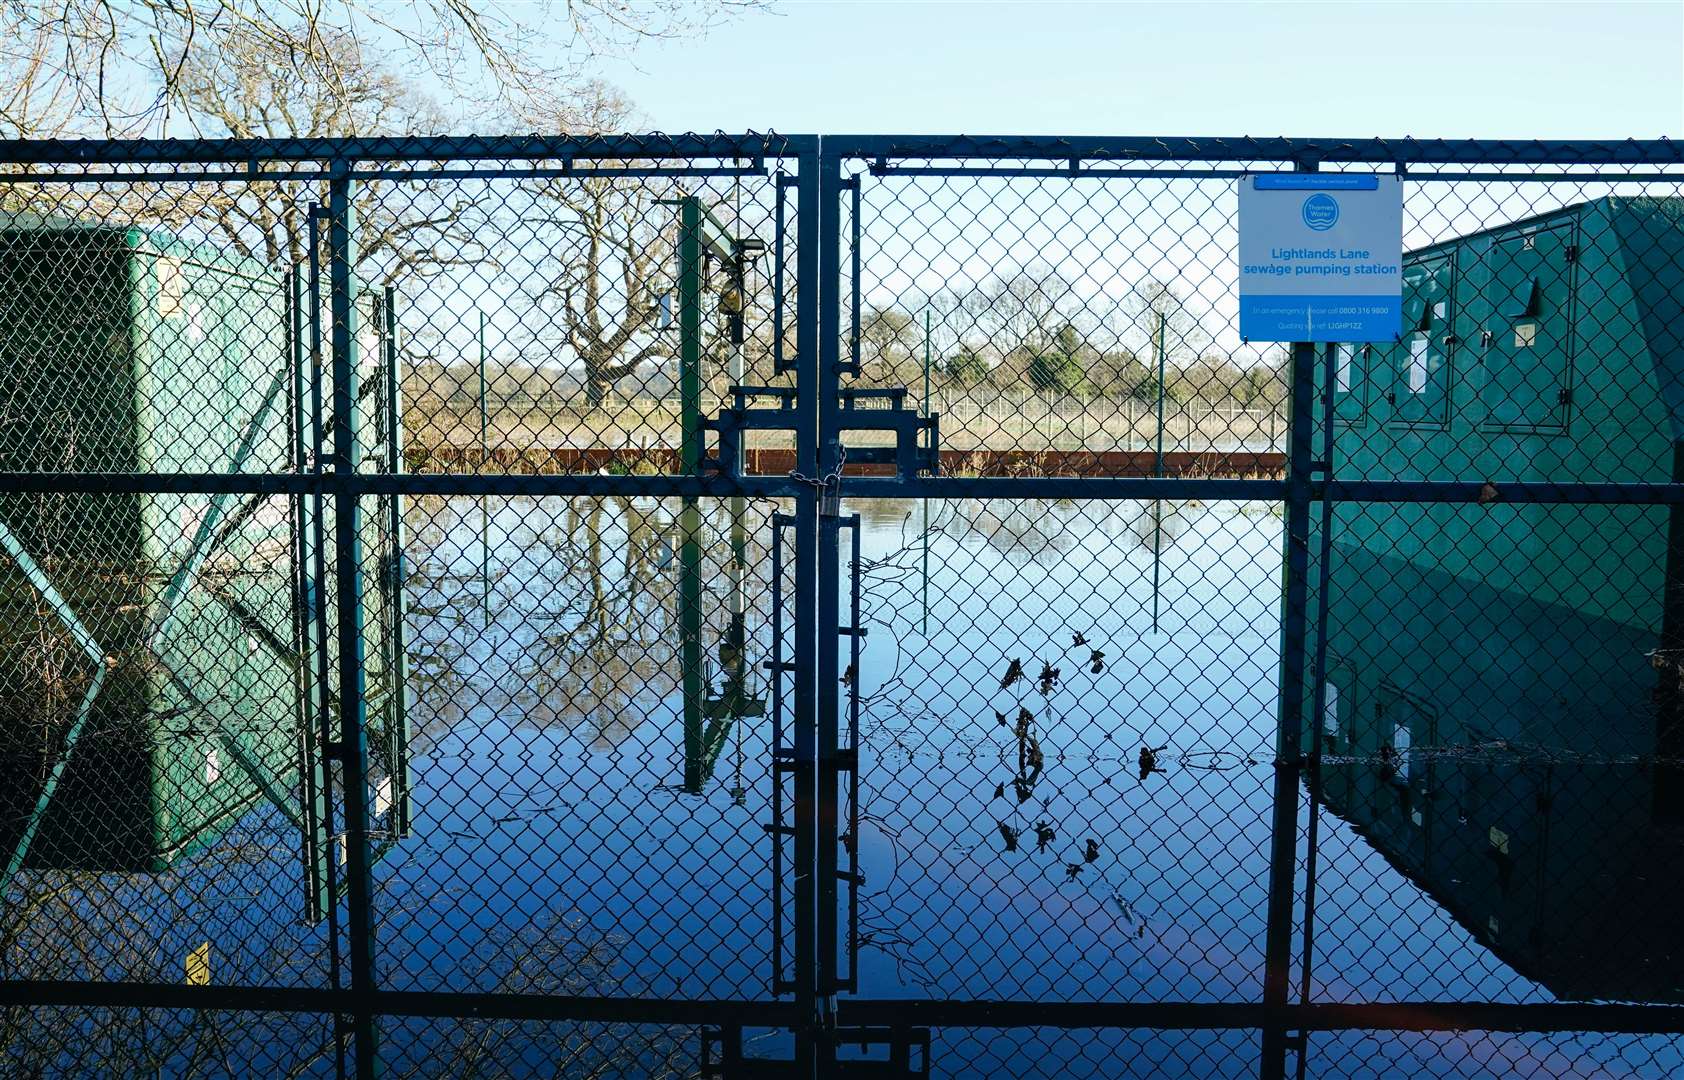 Thames Water apologised to residents after a pumping station in Berskhire flooded following heavy rainfall earlier this year (Andrew Matthews/PA)